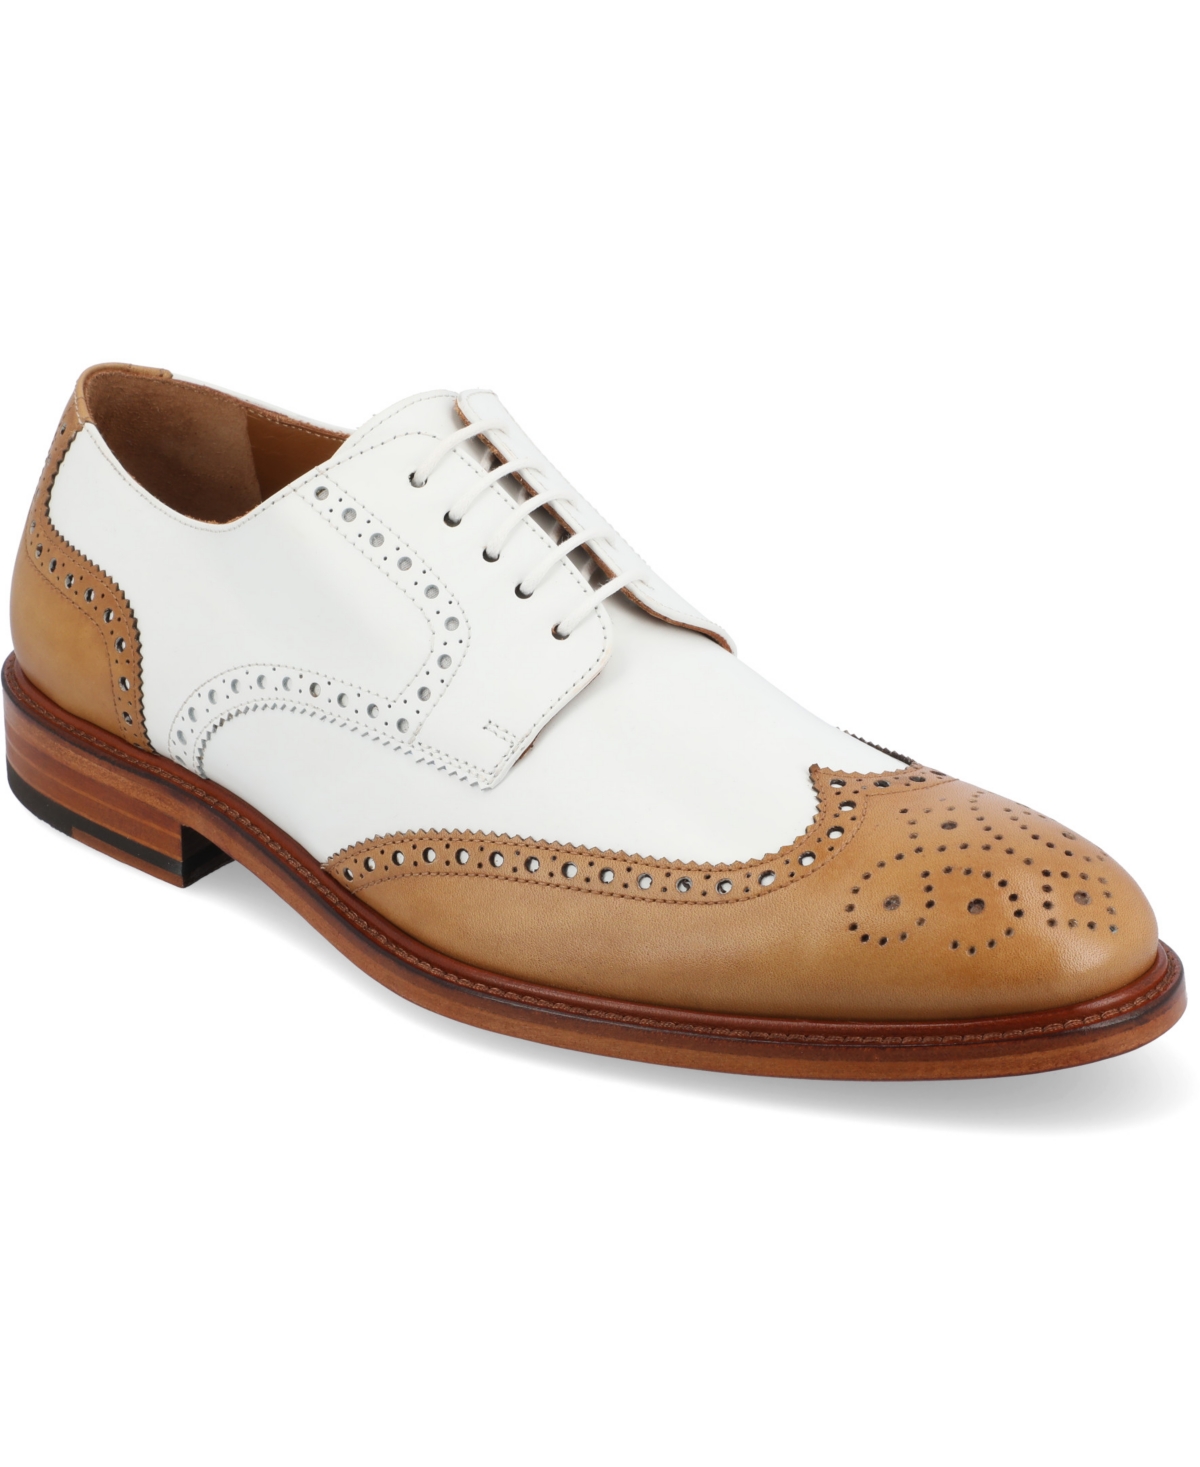 Taft Men's Spectator Handcrafted Leather Brogue Wingtip Oxford Lace-up Dress Shoe In Honey